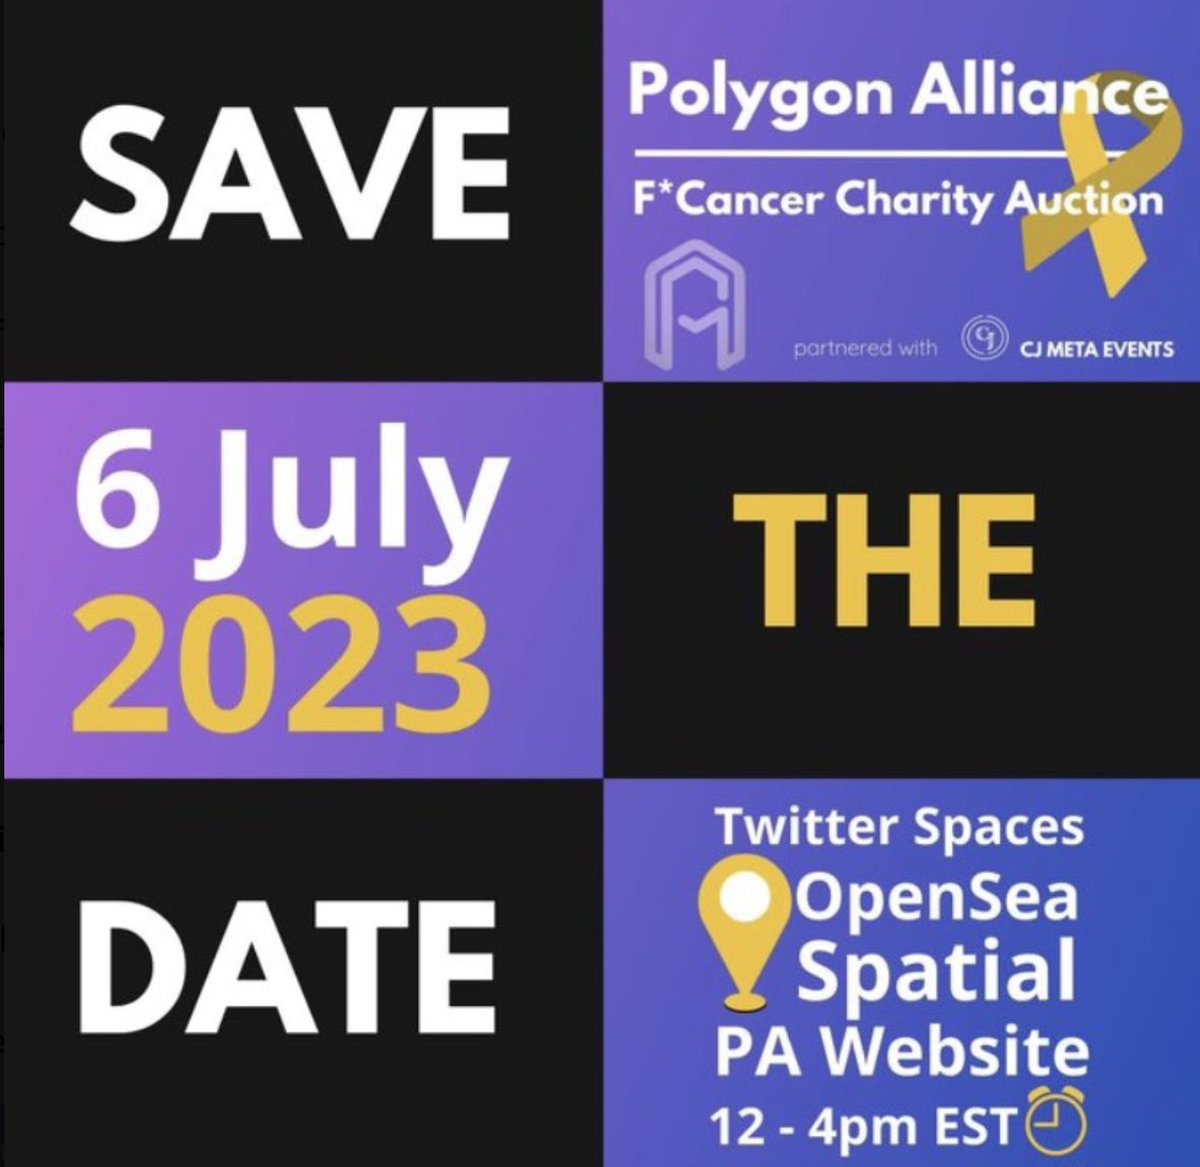 Really awesome to watch the #web3 / #NFT community make charity a priority! Big thanks to @Davc_s and the entire @PolygonAlliance family for planning the second annual #FCancer charity auction. Tune in July 6th on @Spatial_io to bid, donate and support @FCancerNow!